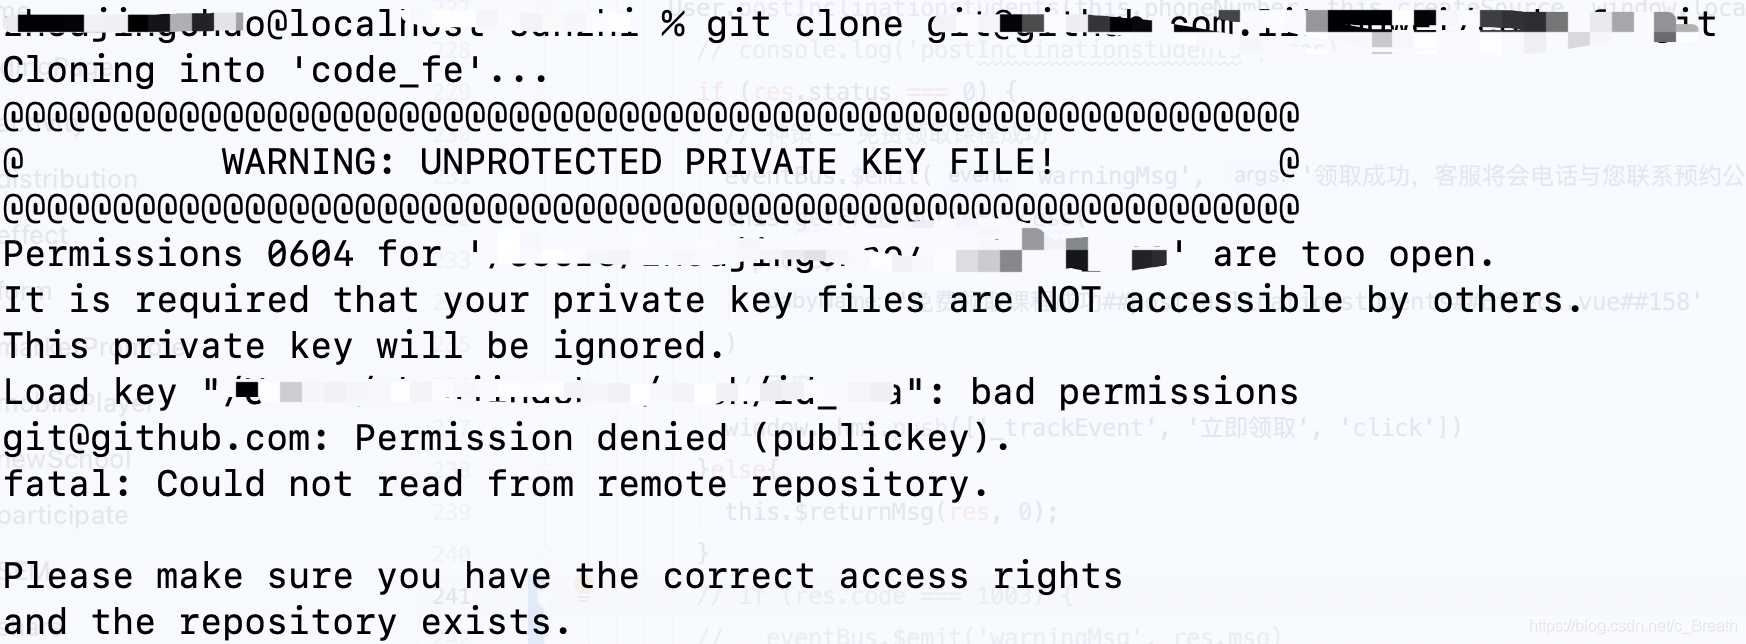 Warning: Unprotected Private Key File!_The৲One的博客-Csdn博客